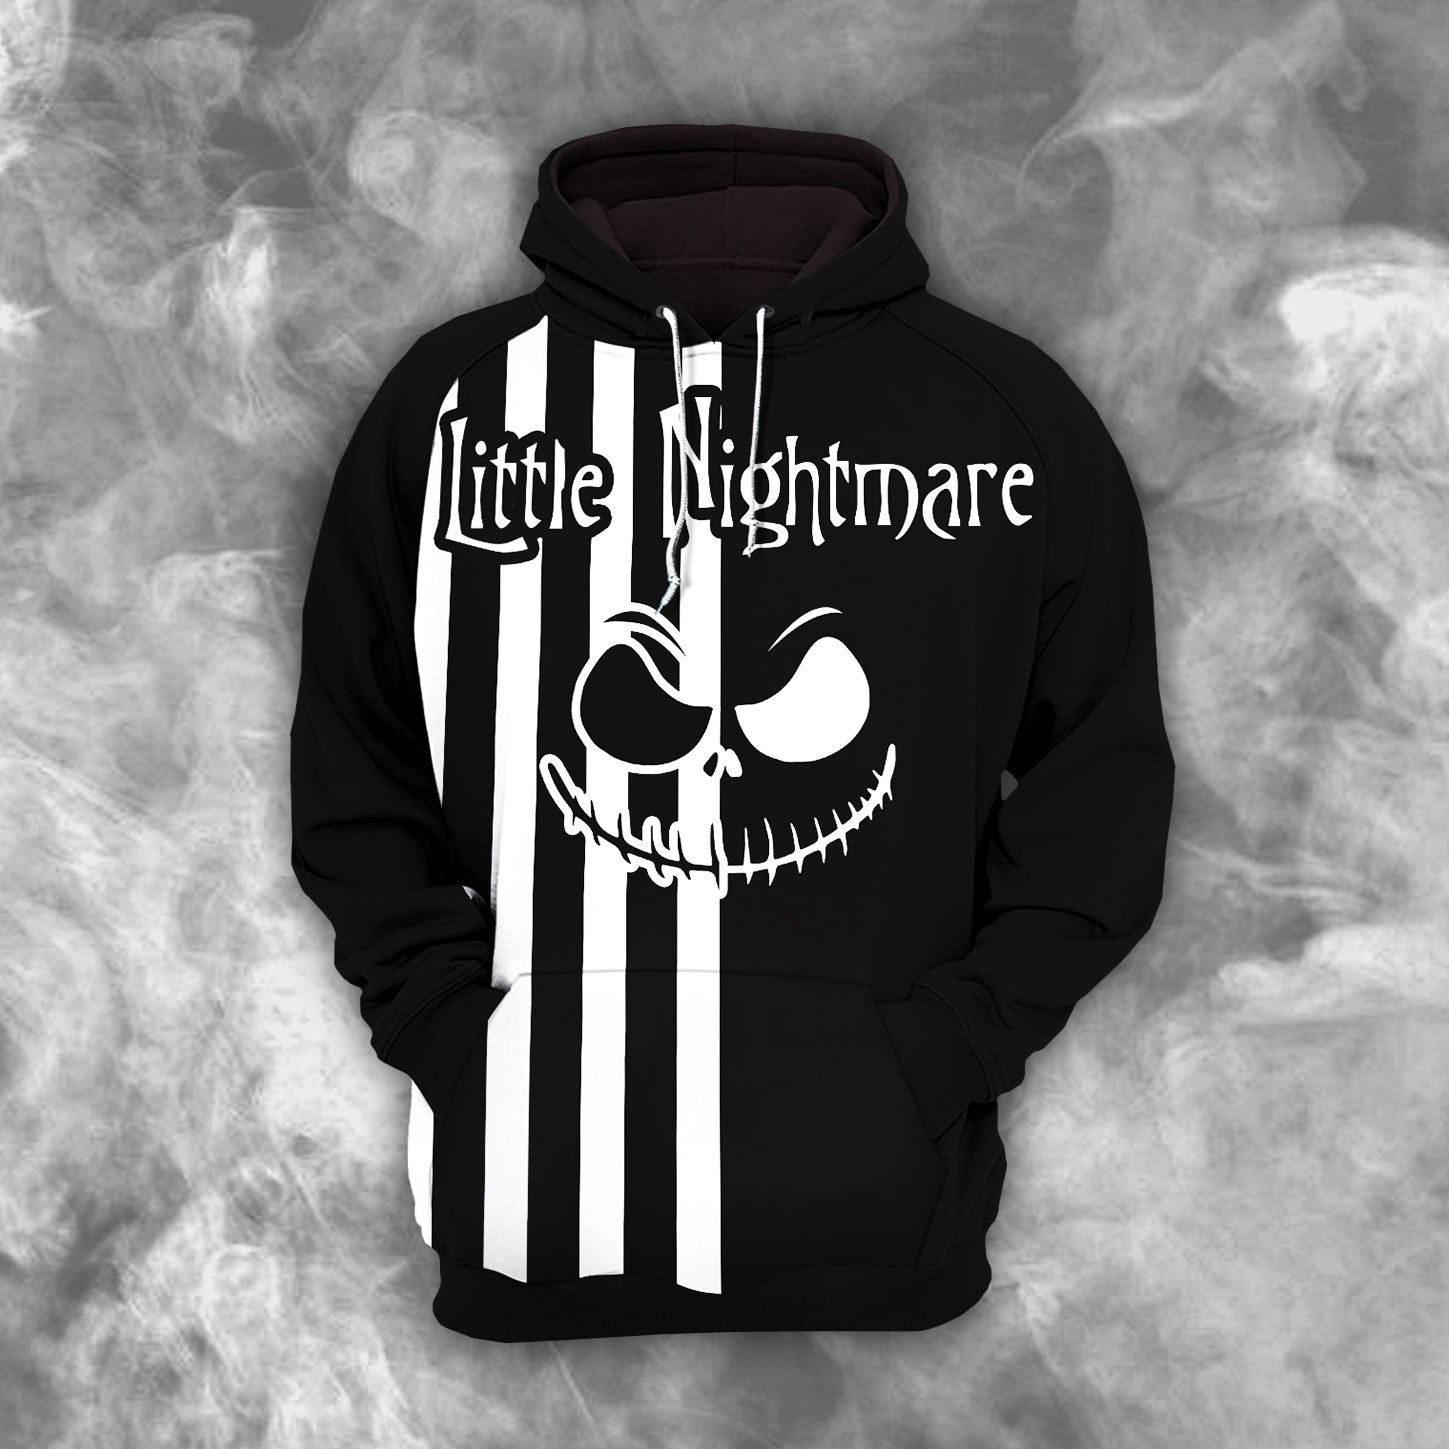  Skull Nightmare Theme Combo Hoodie and Leggings - Dark and edgy matching set with skull designs for a unique and stylish look.